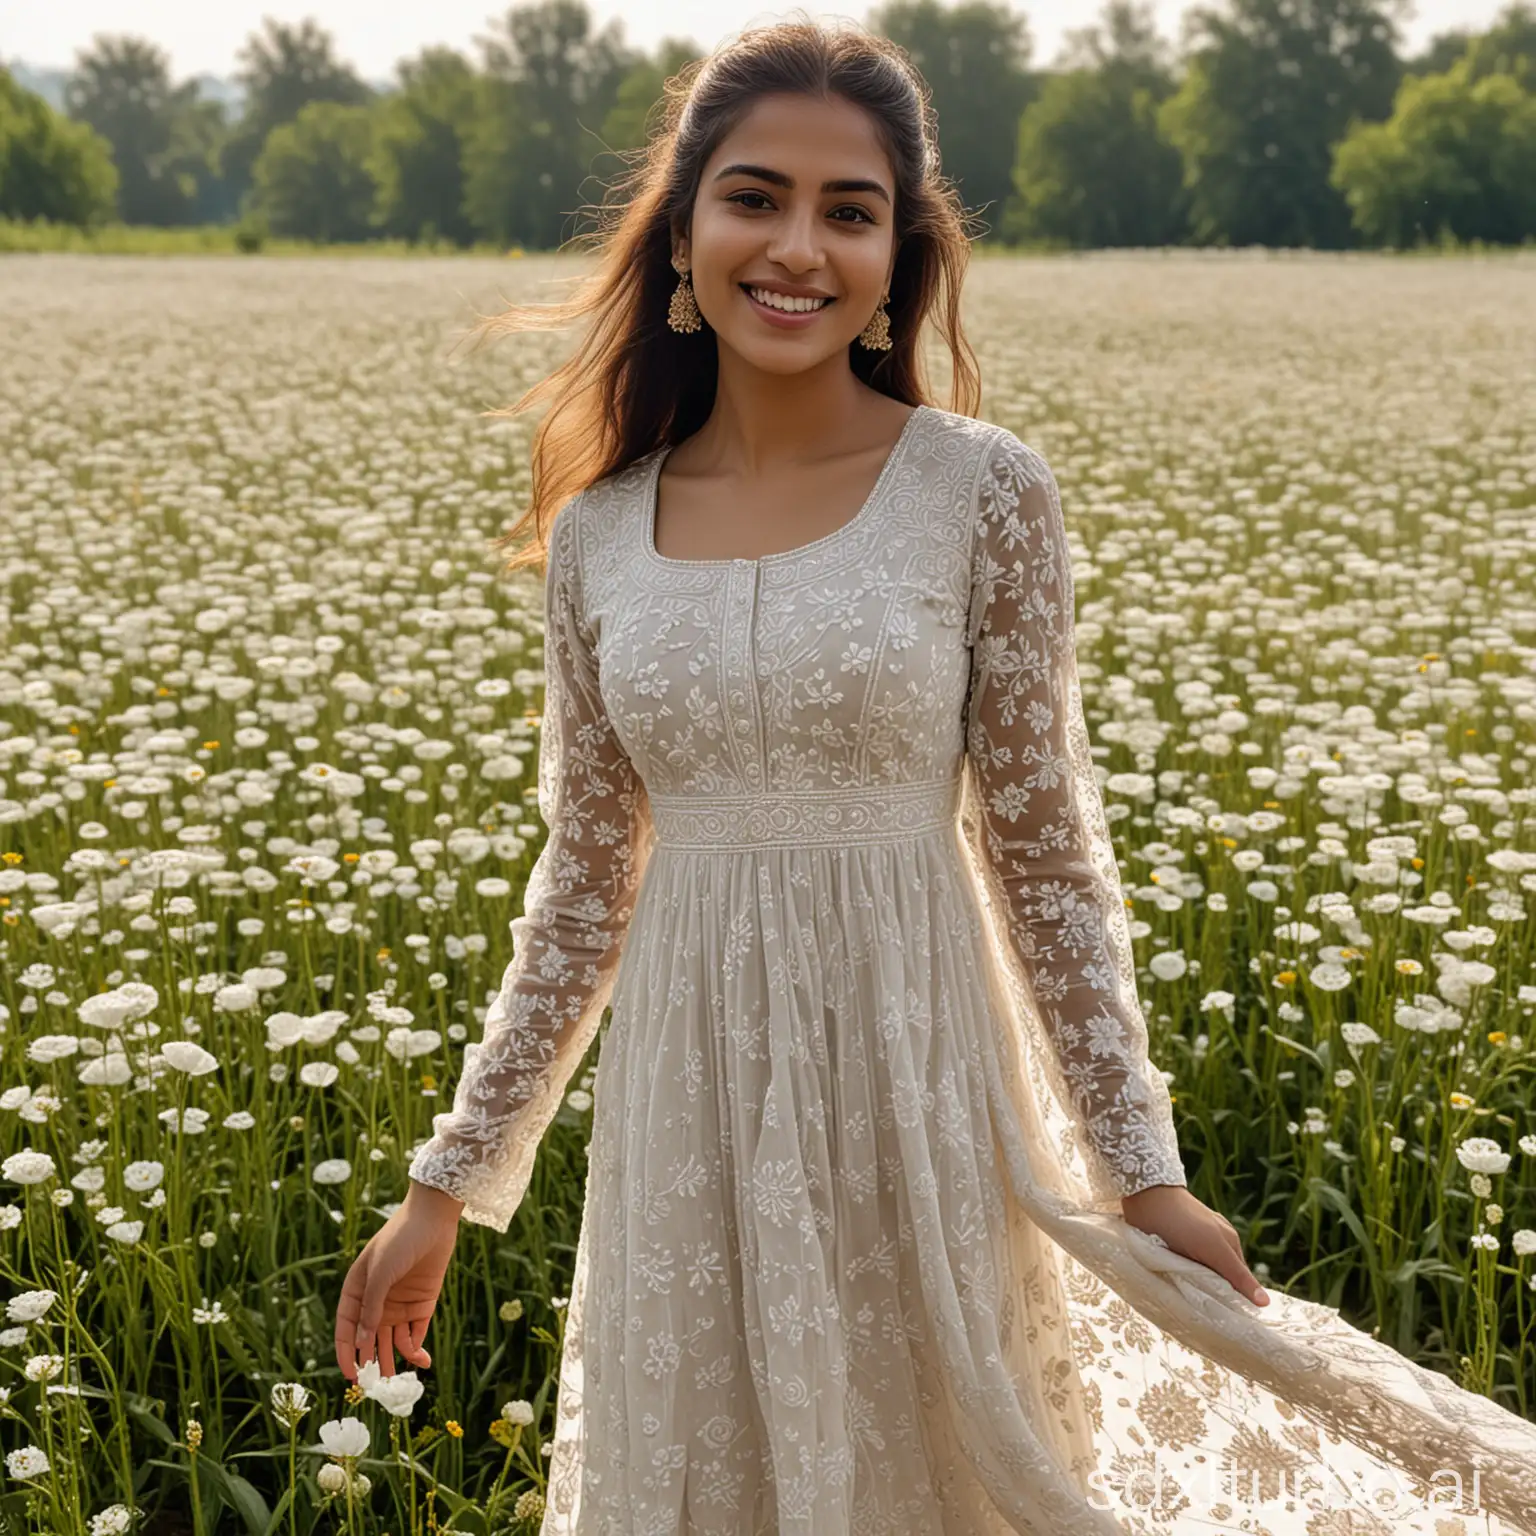 A woman is standing in a field of flowers, wearing a long, flowing Chikankari gown. The gown is made of a sheer fabric and is covered in intricate embroidery. The woman has her hair down and is wearing a light amount of makeup. She is smiling and looking at the camera.